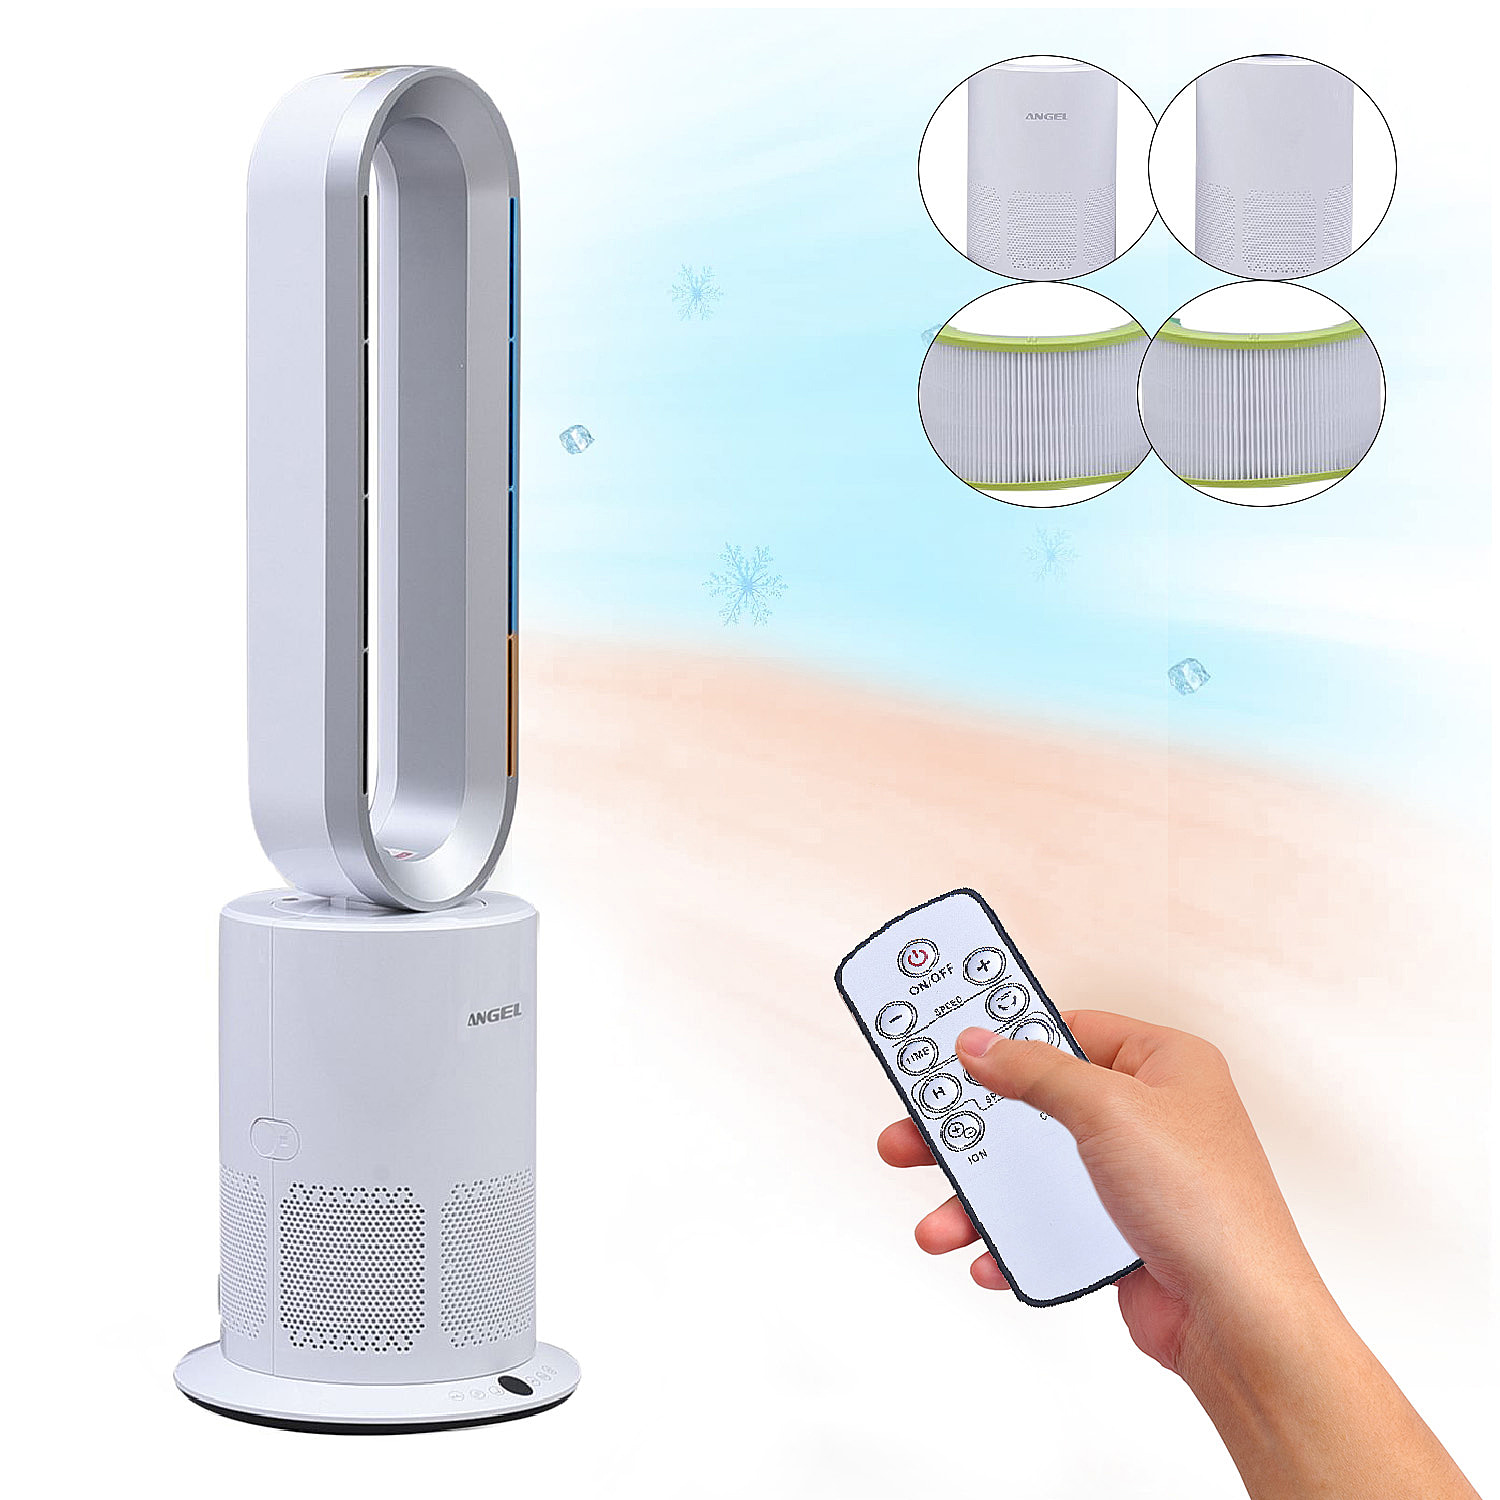 5 in 1 Electric Bladeless Heater/Fan with Remote Control, Air Purifier with HEPA Filter (86Cm) - White and Silver